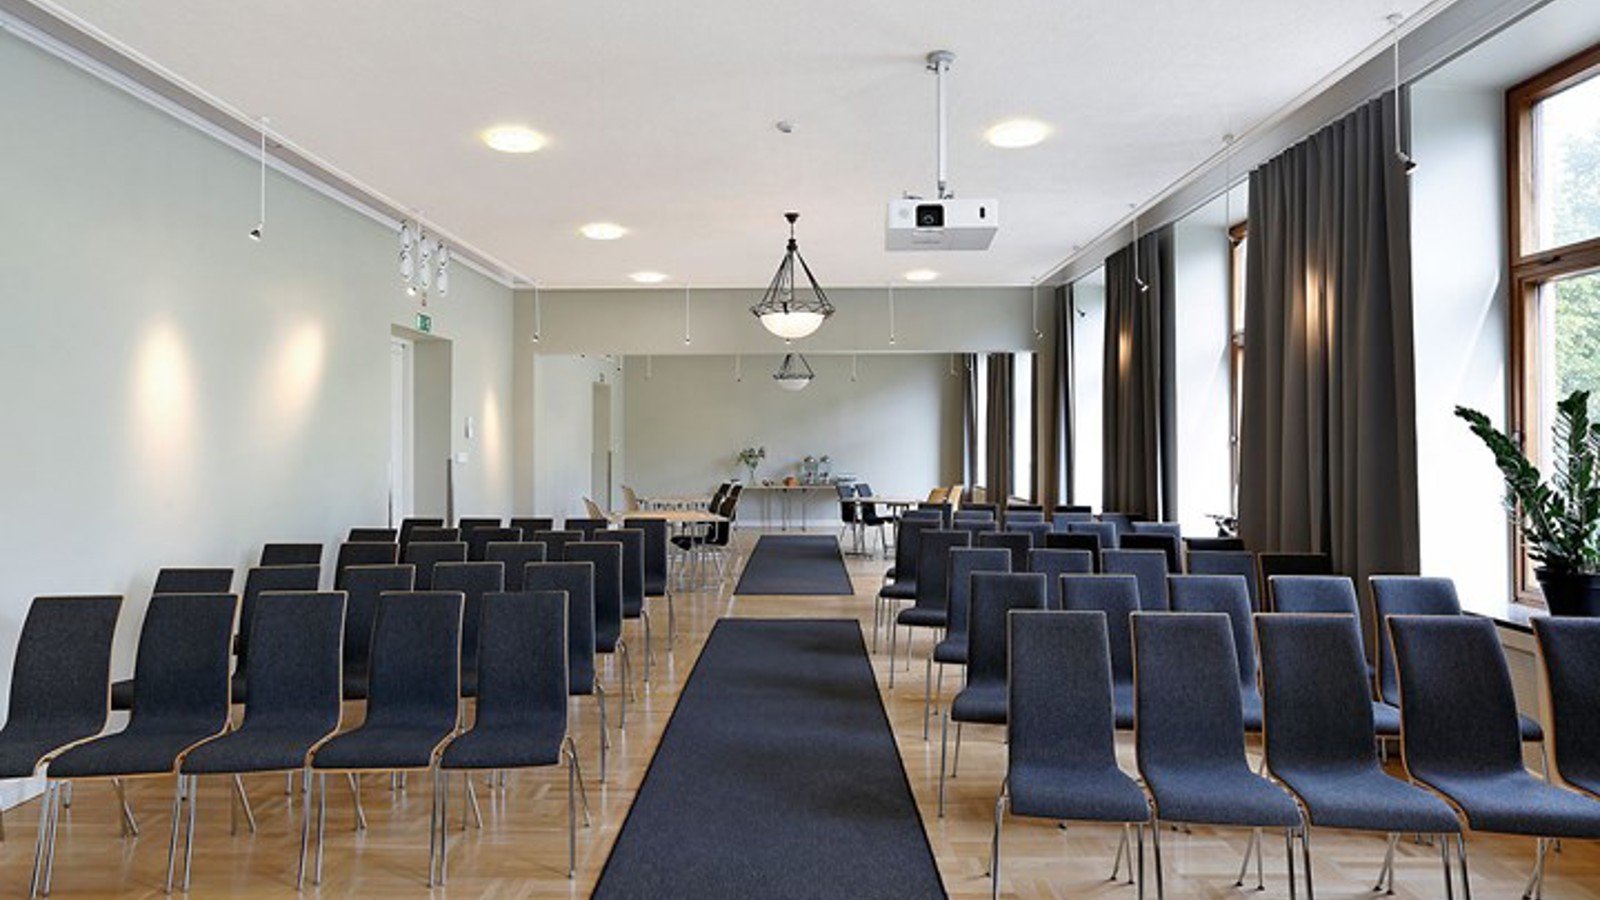 Conference room with lined up dark chairs, light walls and large windows